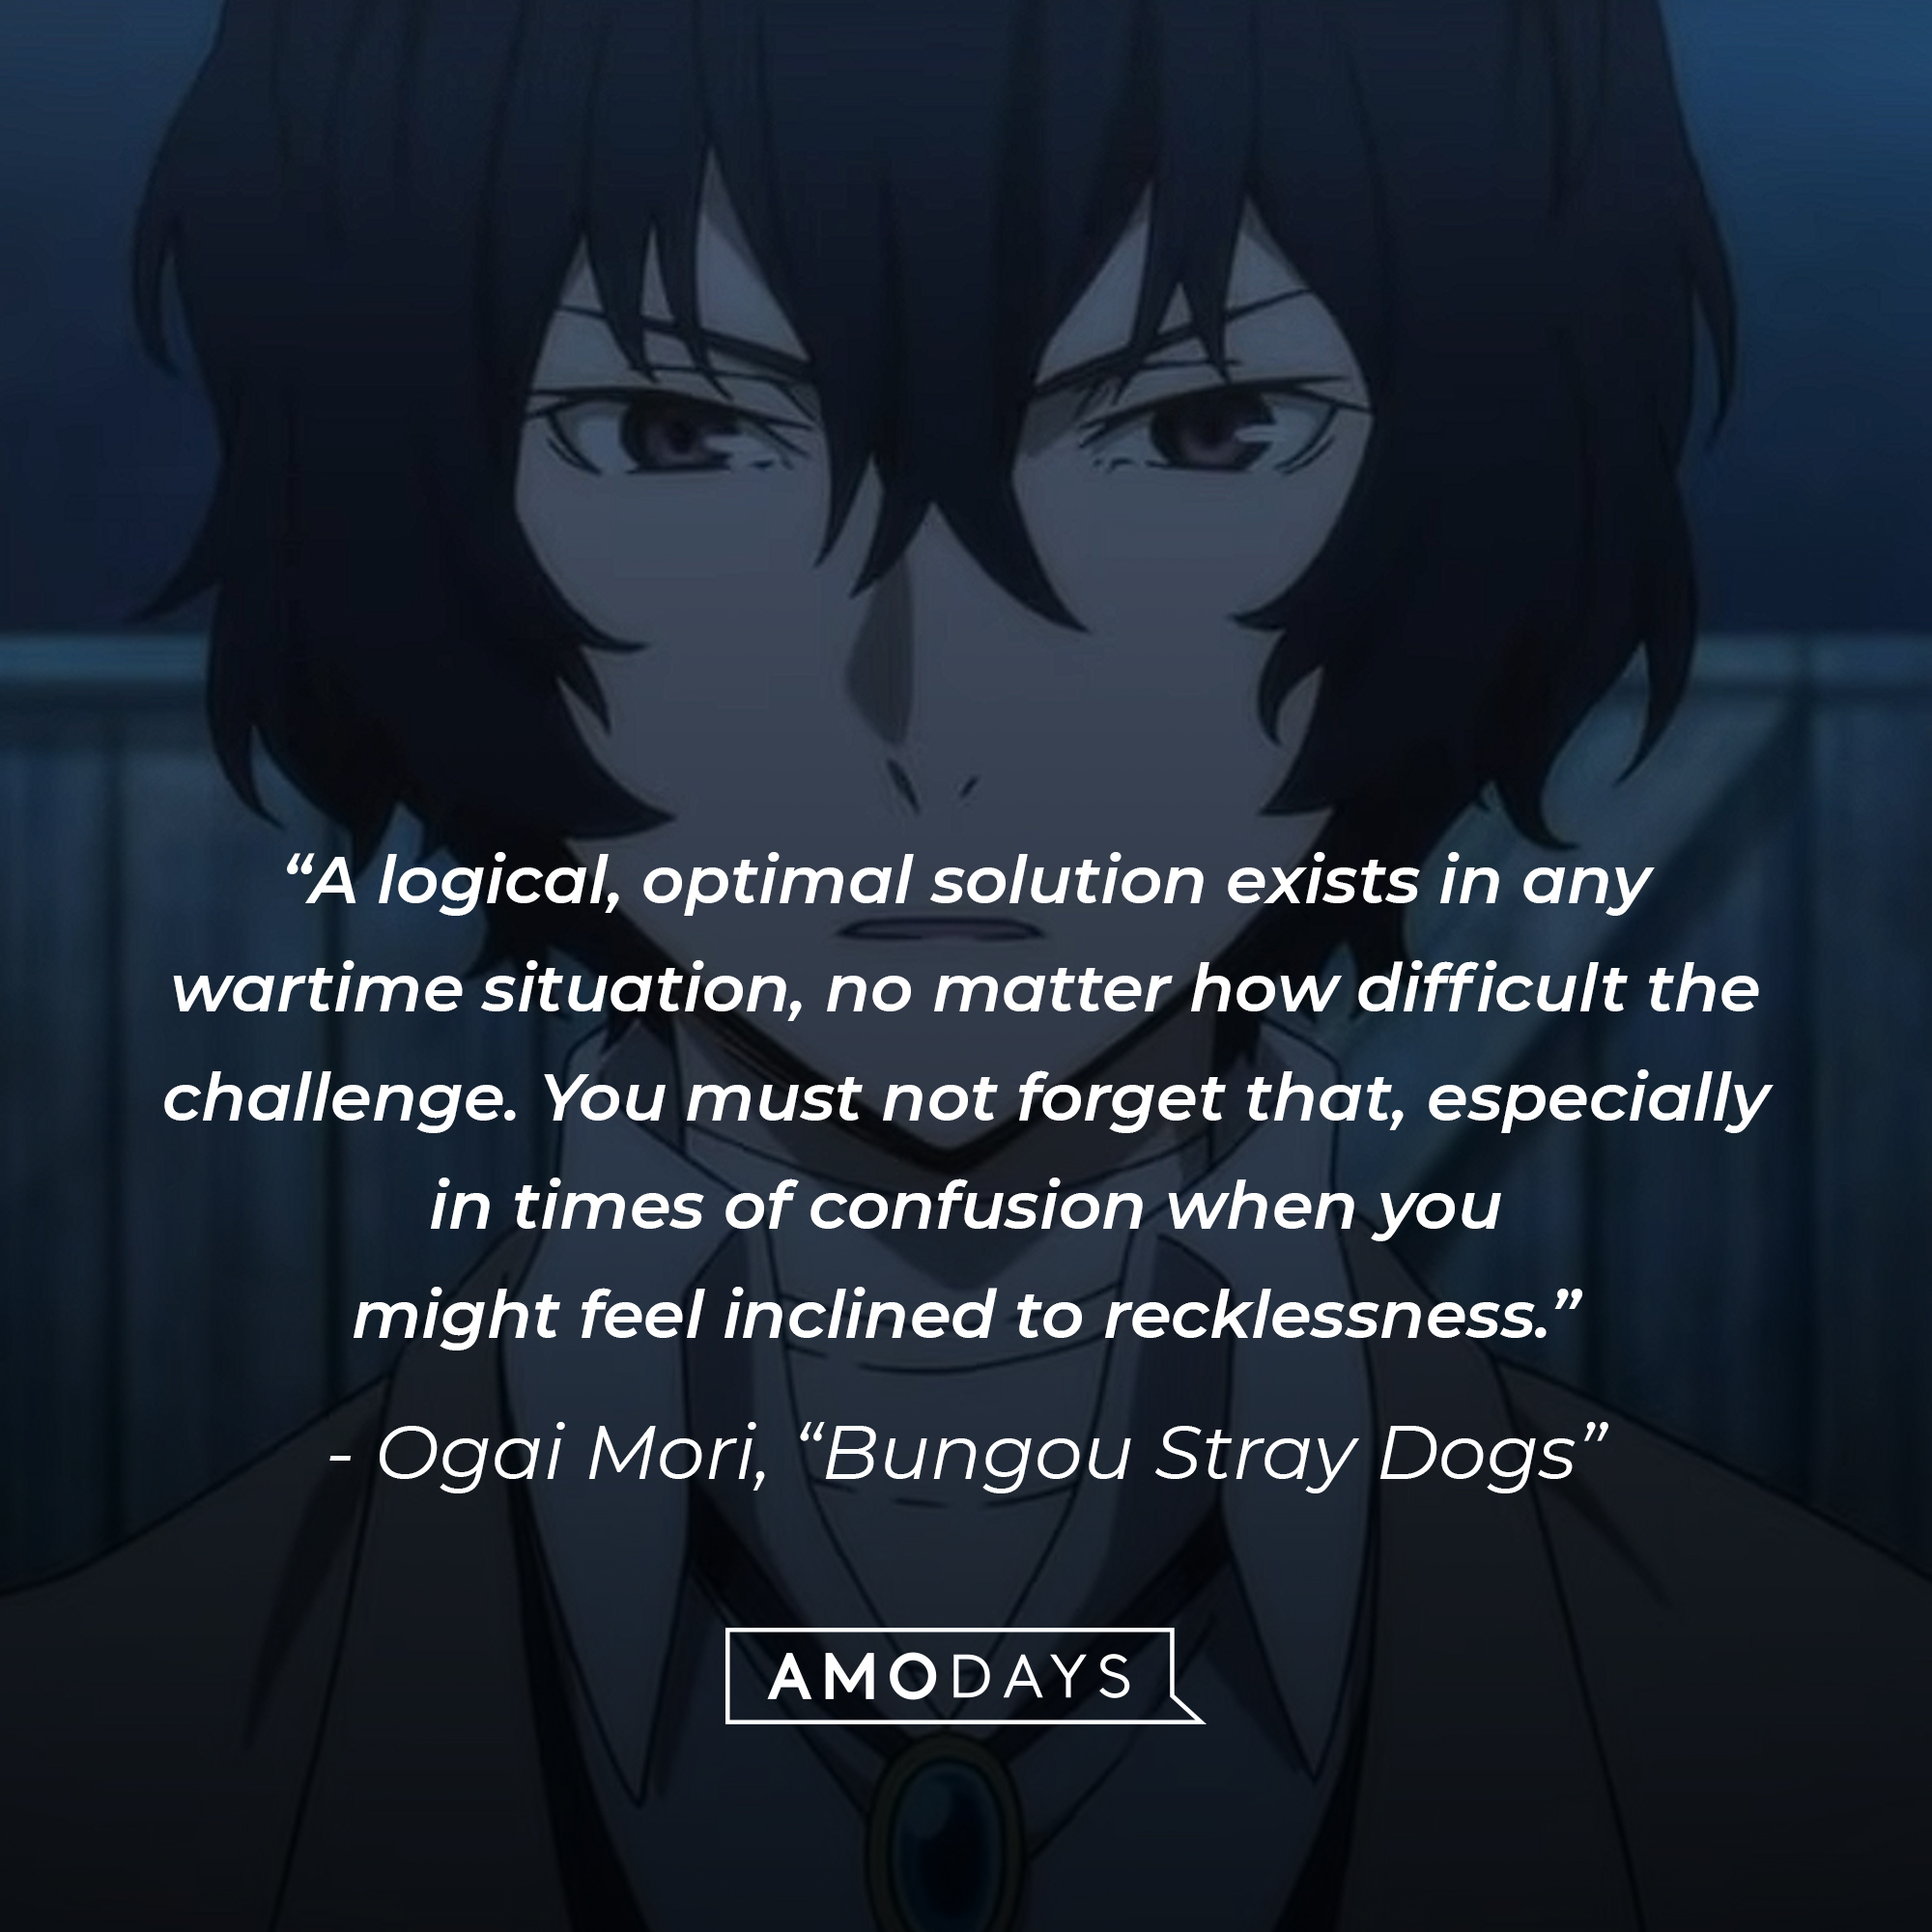 Ogai Mori's quote: "A logical, optimal solution exists in any wartime situation, no matter how difficult the challenge. You must not forget that, especially in times of confusion when you might feel inclined to recklessness.” | Image: youtube.com/Crunchyroll Collection